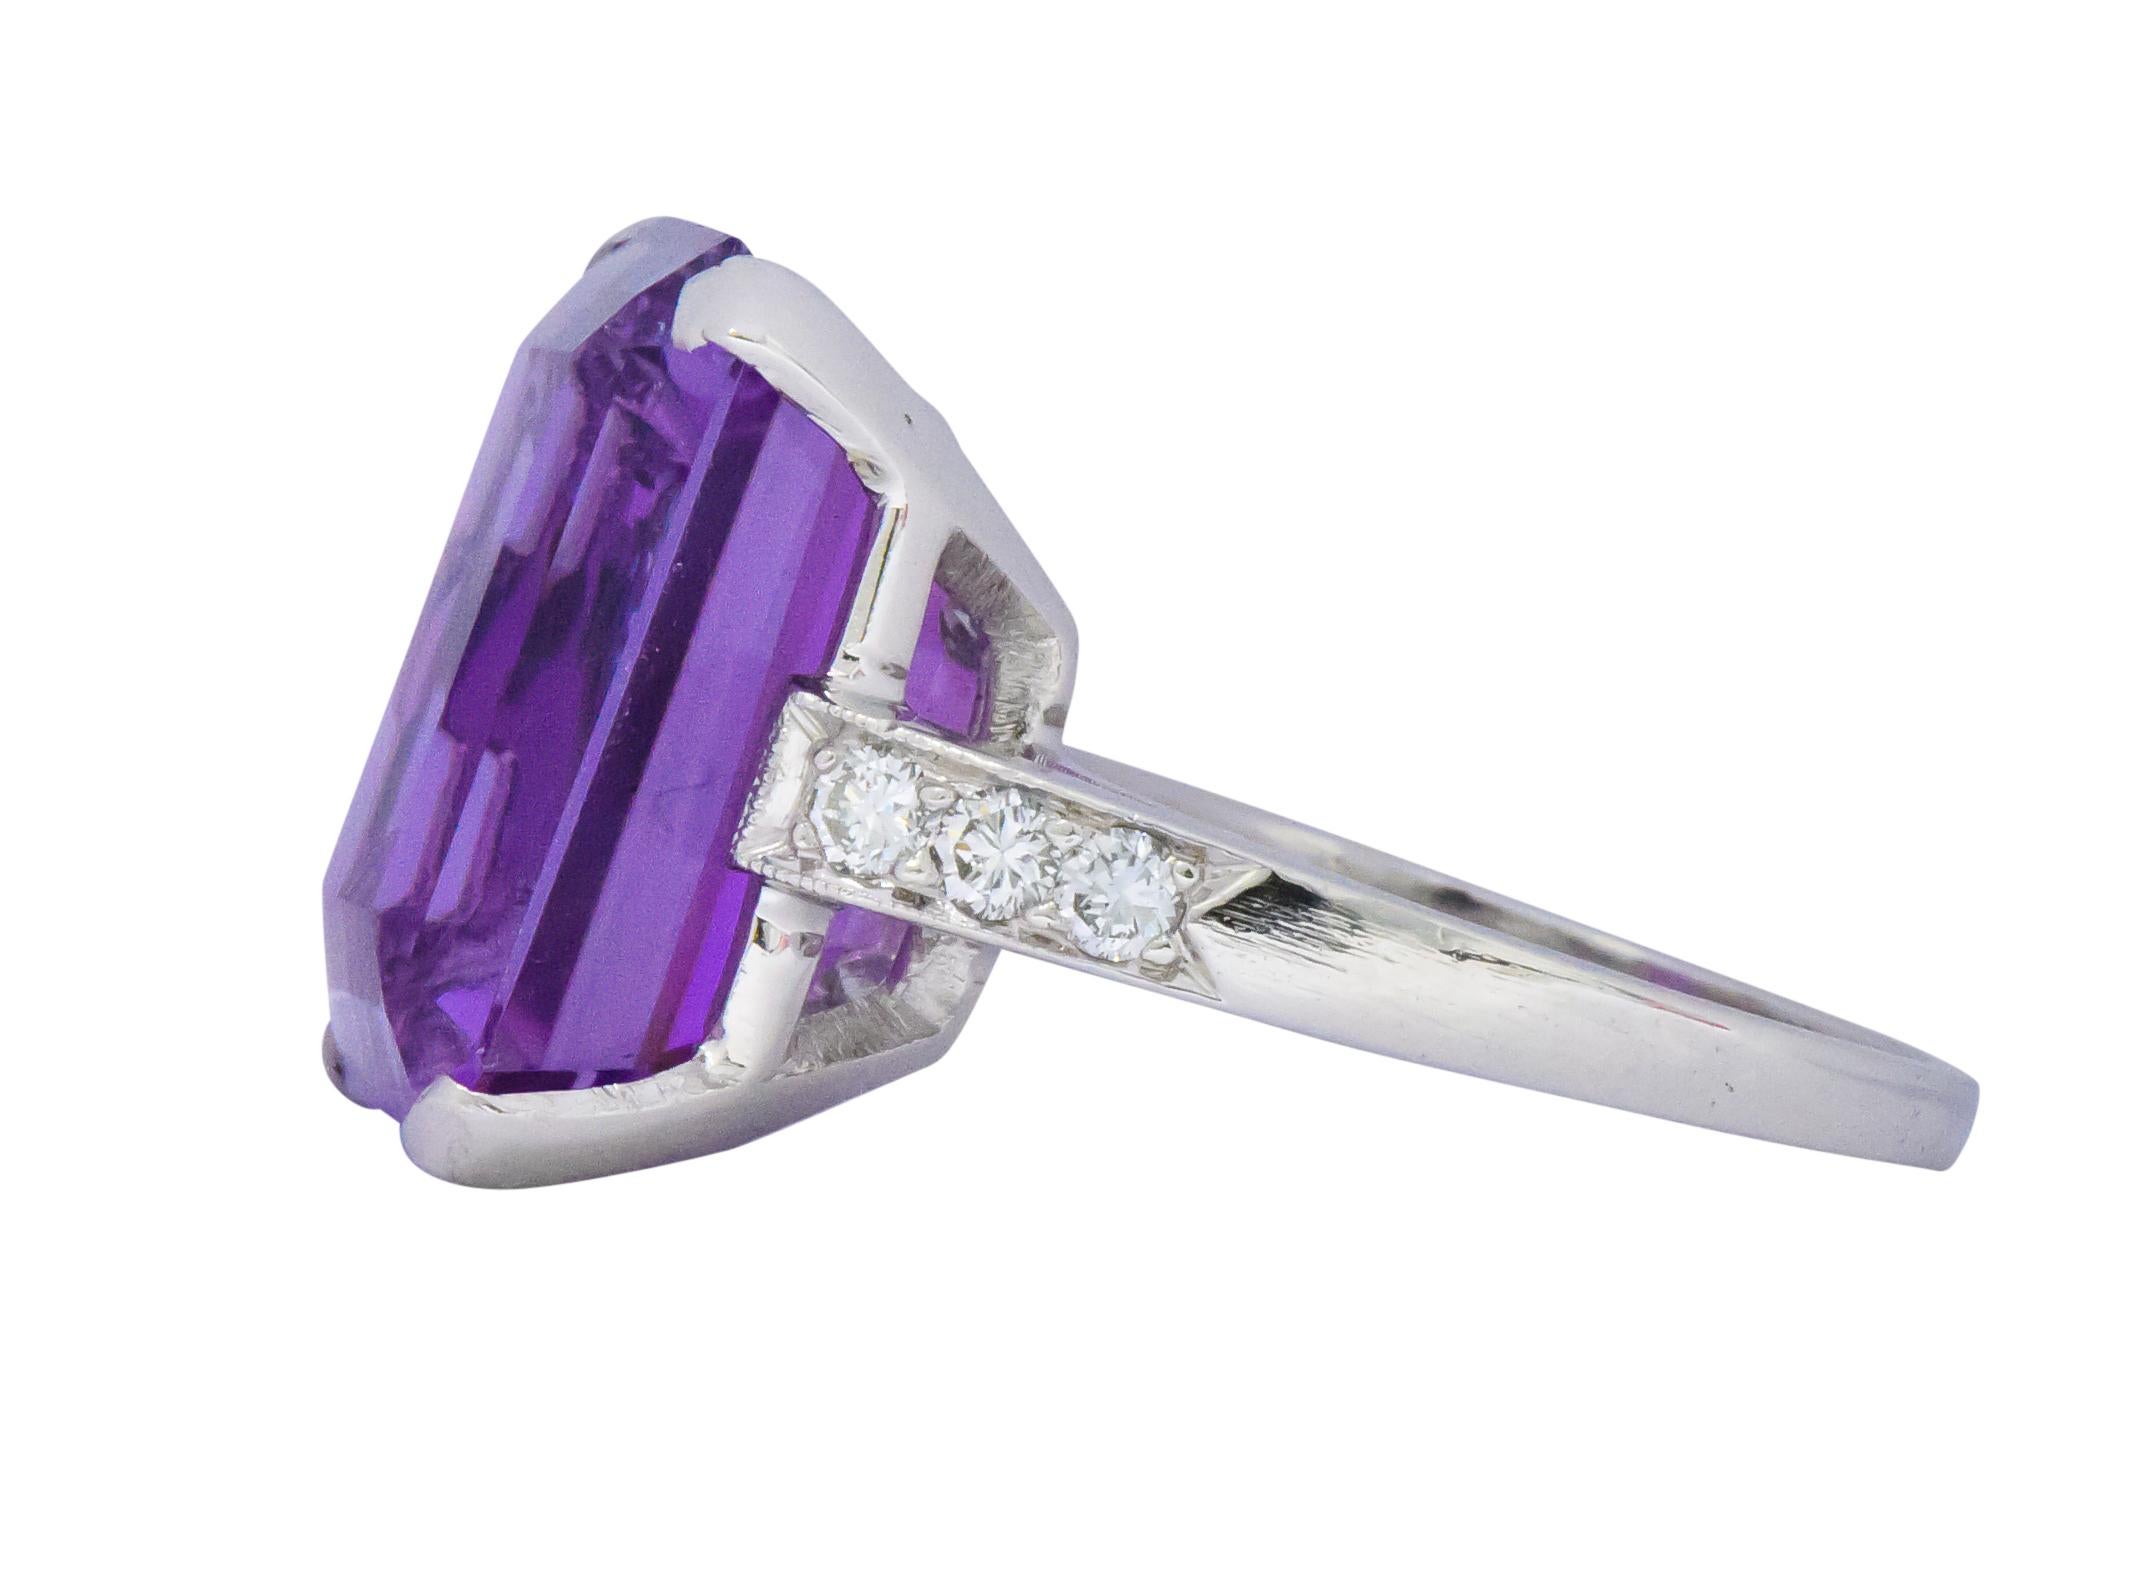 Centering an emerald cut amethyst weighing approximately 10.75 carats total, even bright vivid purple  

Accented by 3 round brilliant cut diamonds on each side, weighing approximately 0.25 carats total, G/H color and VS clarity

Extraordinary color